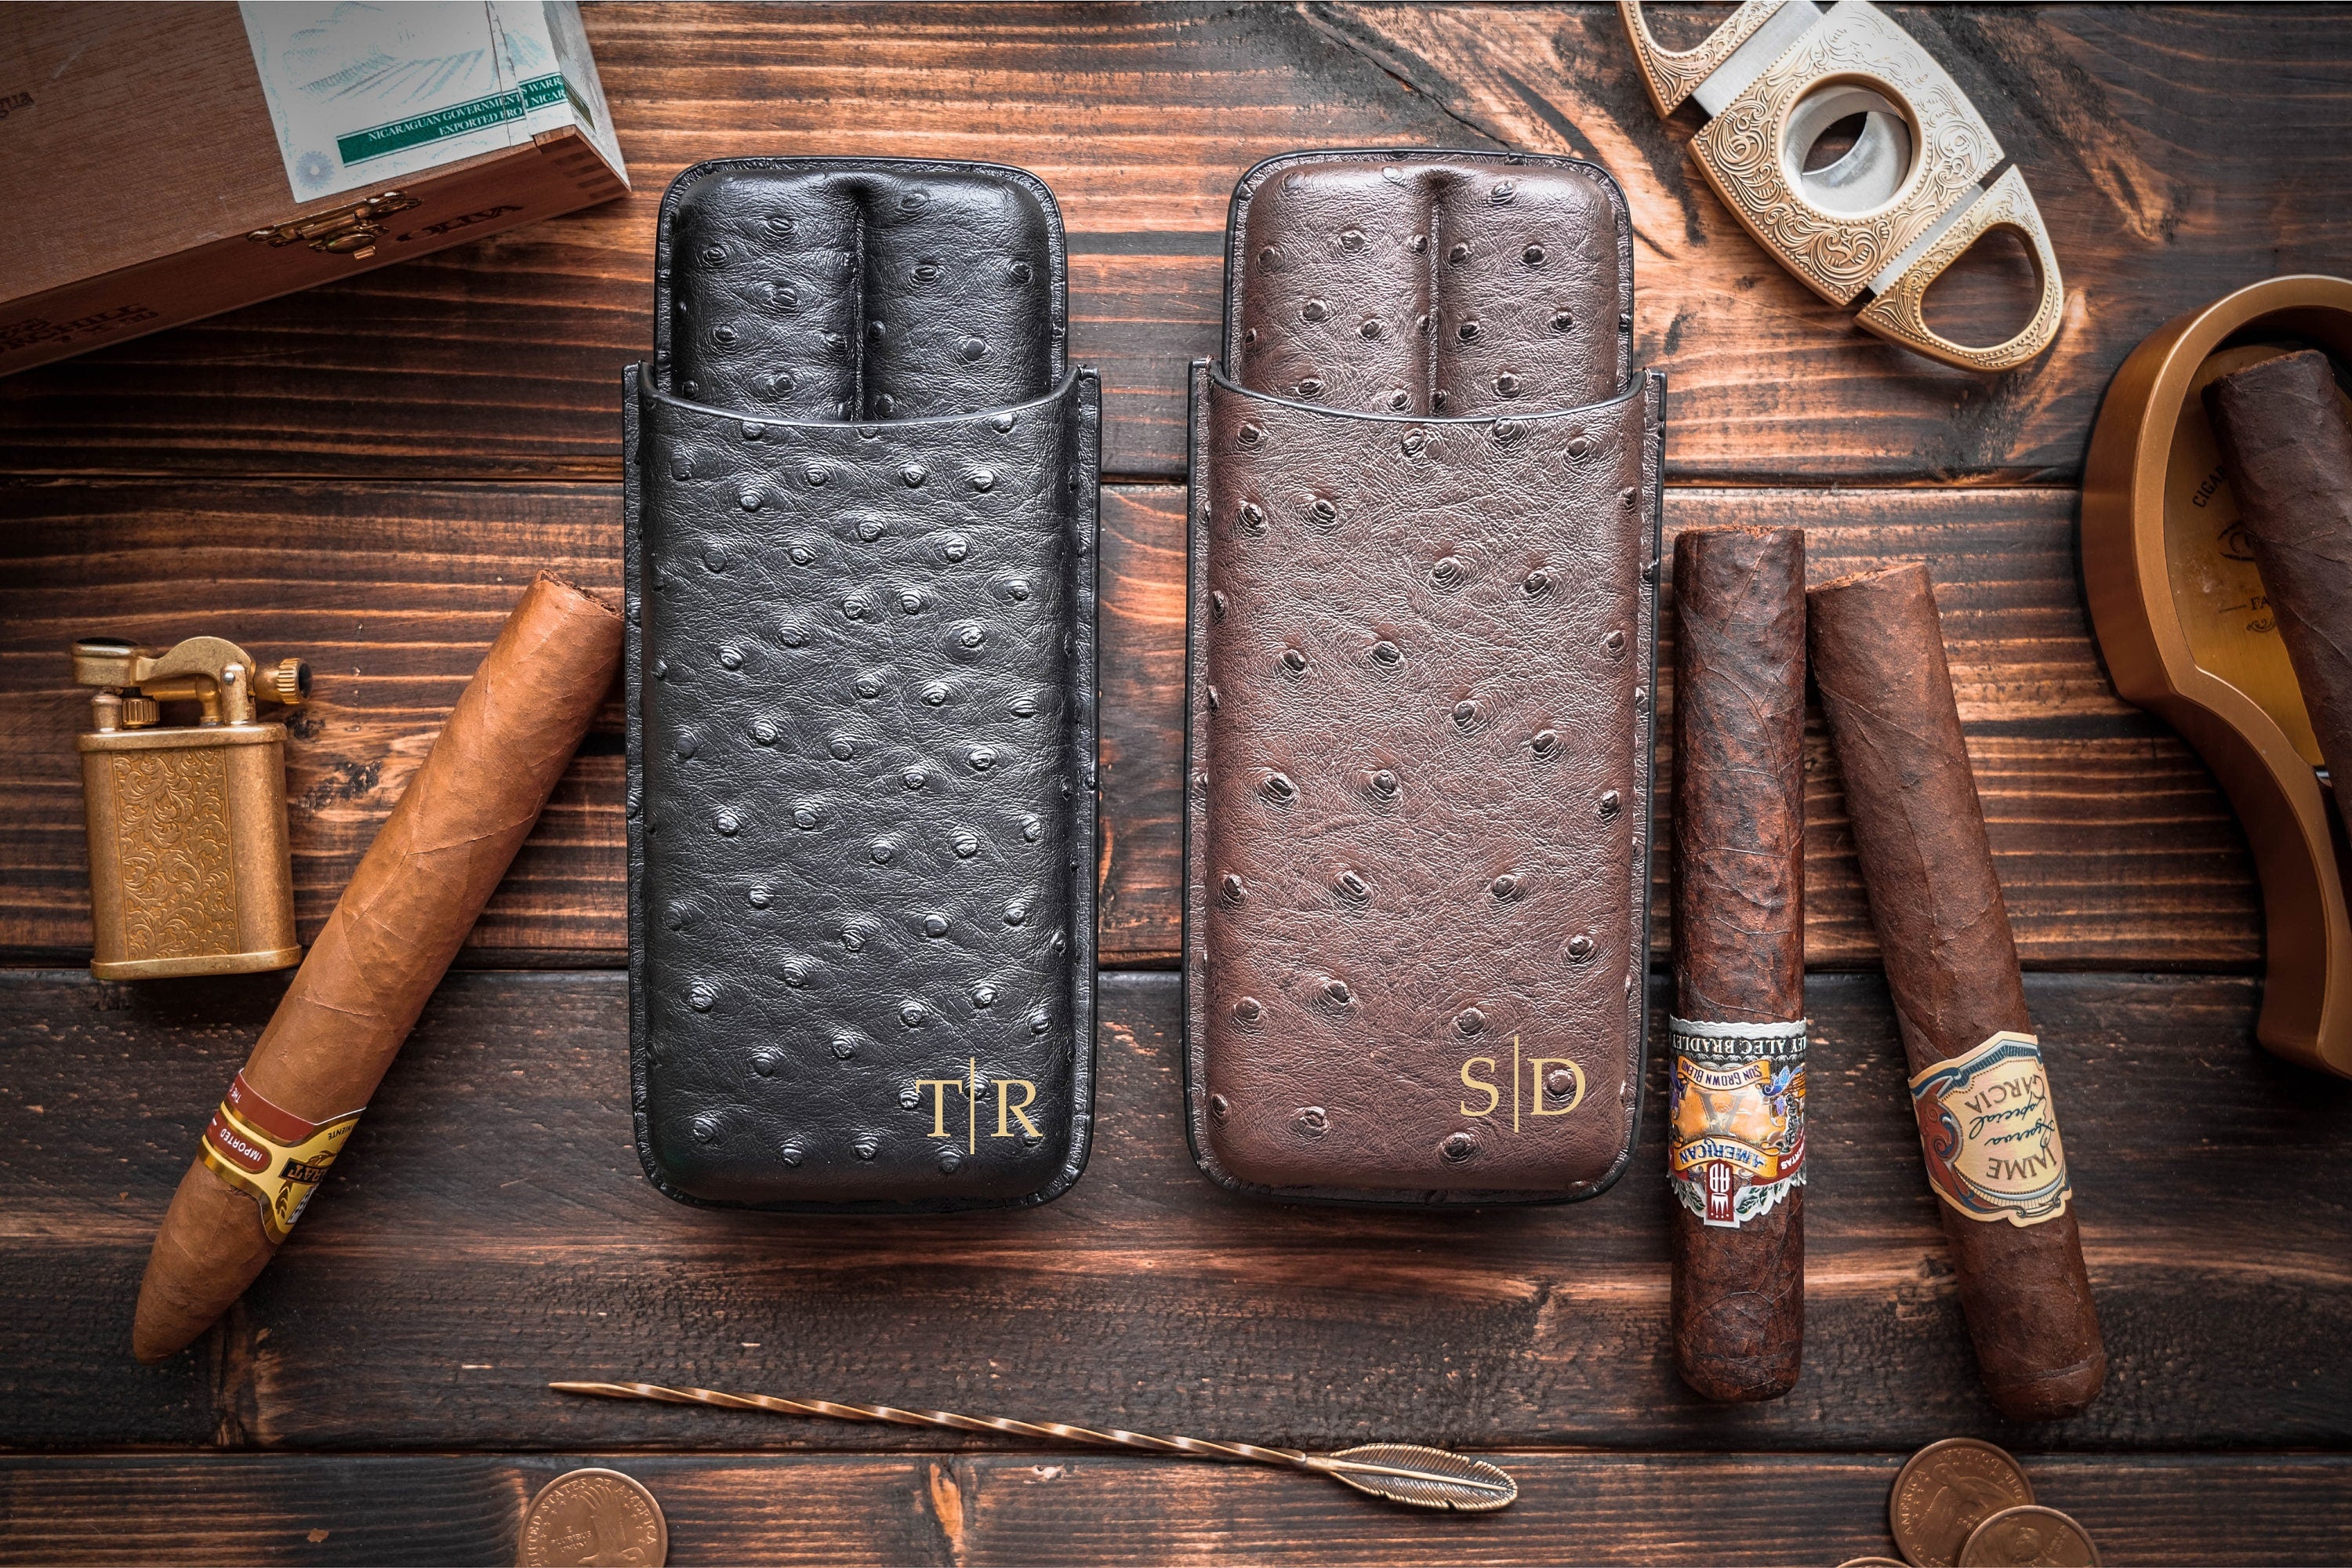 Hand made Leather Cigar Cases, Cigar Holders